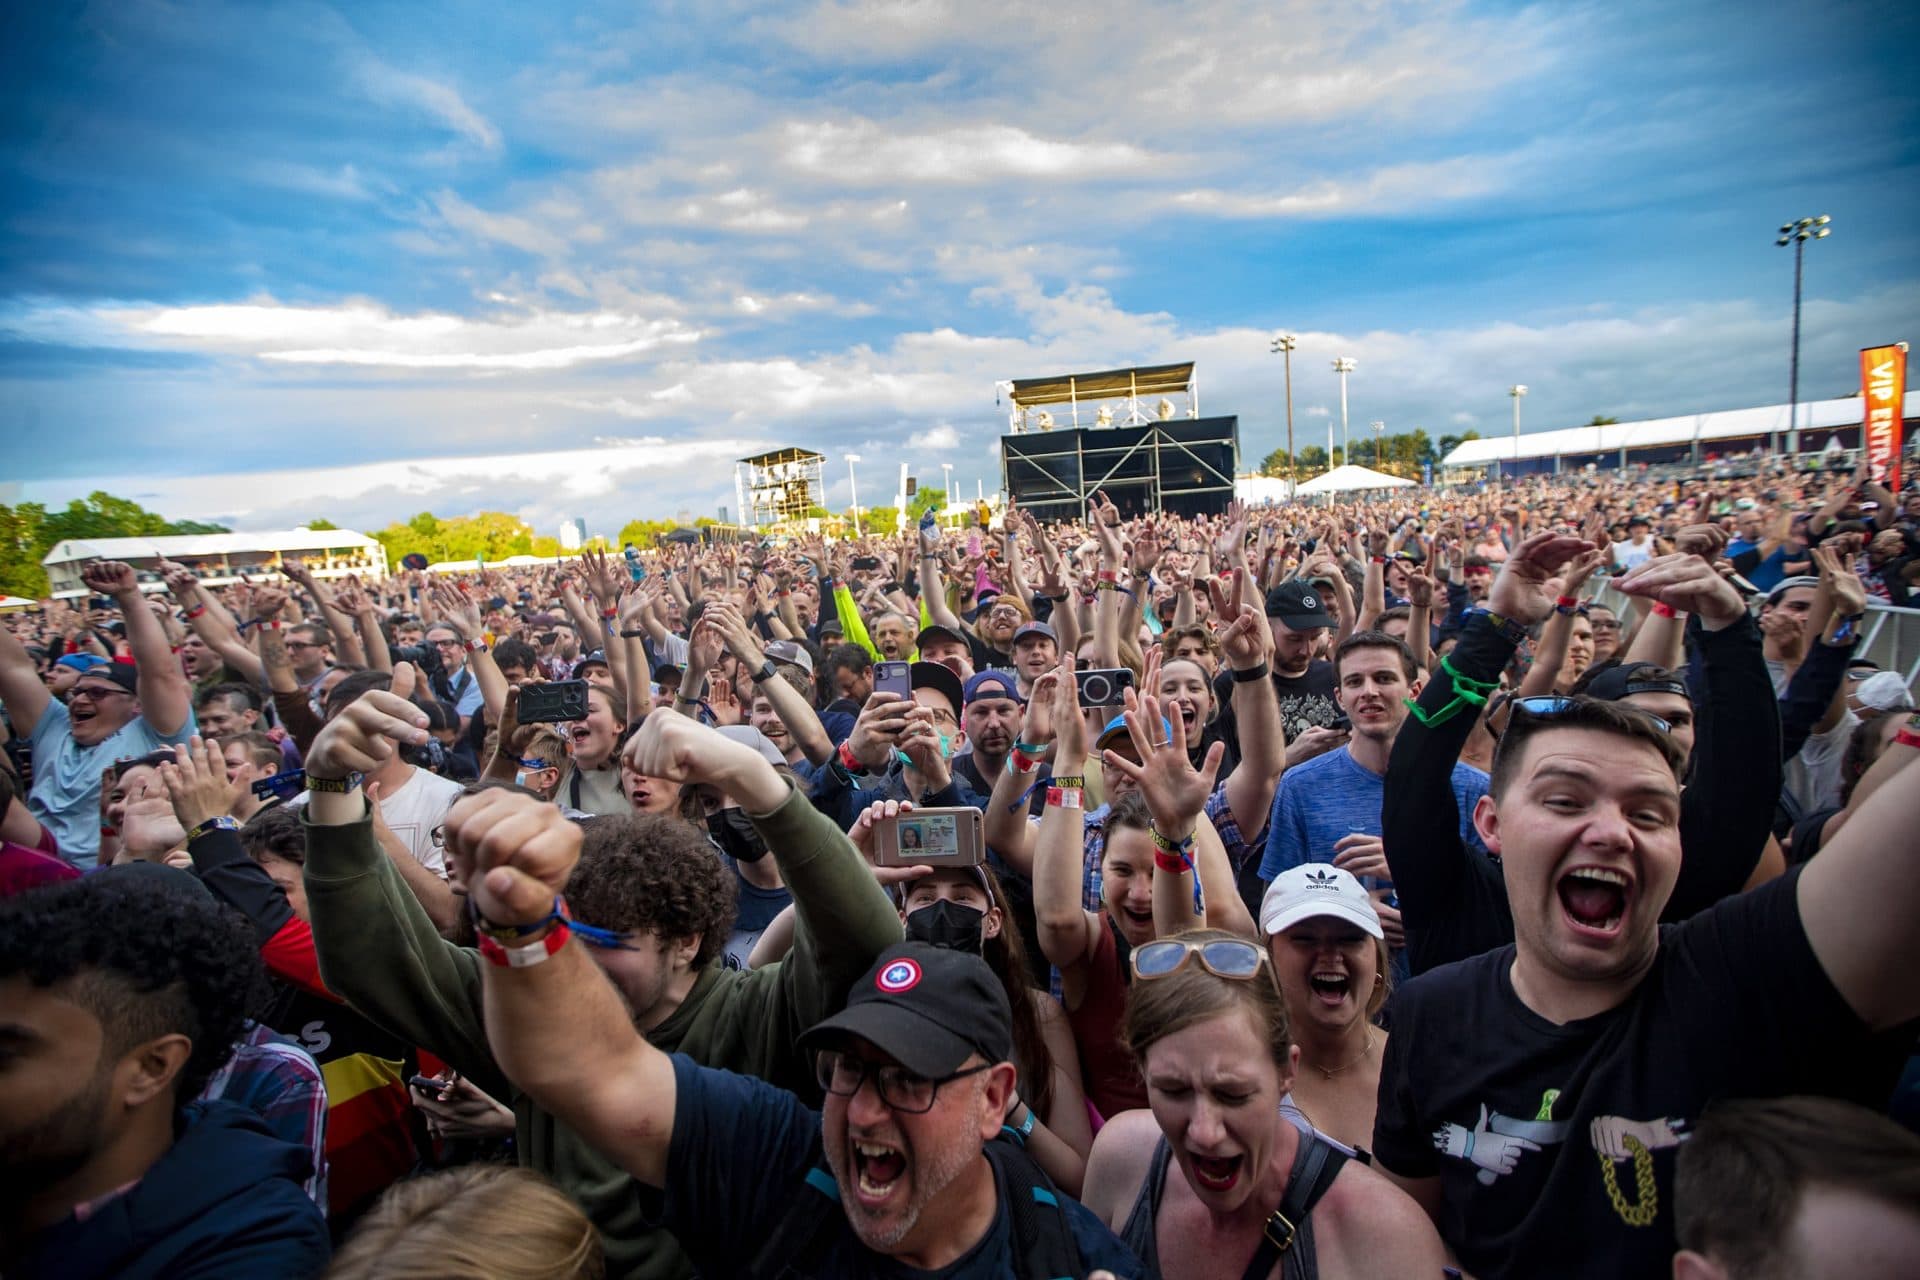 The crowd goes wild as Run the Jewels takes the stage at the Boston Calling Music Festival. (Jesse Costa/WBUR)